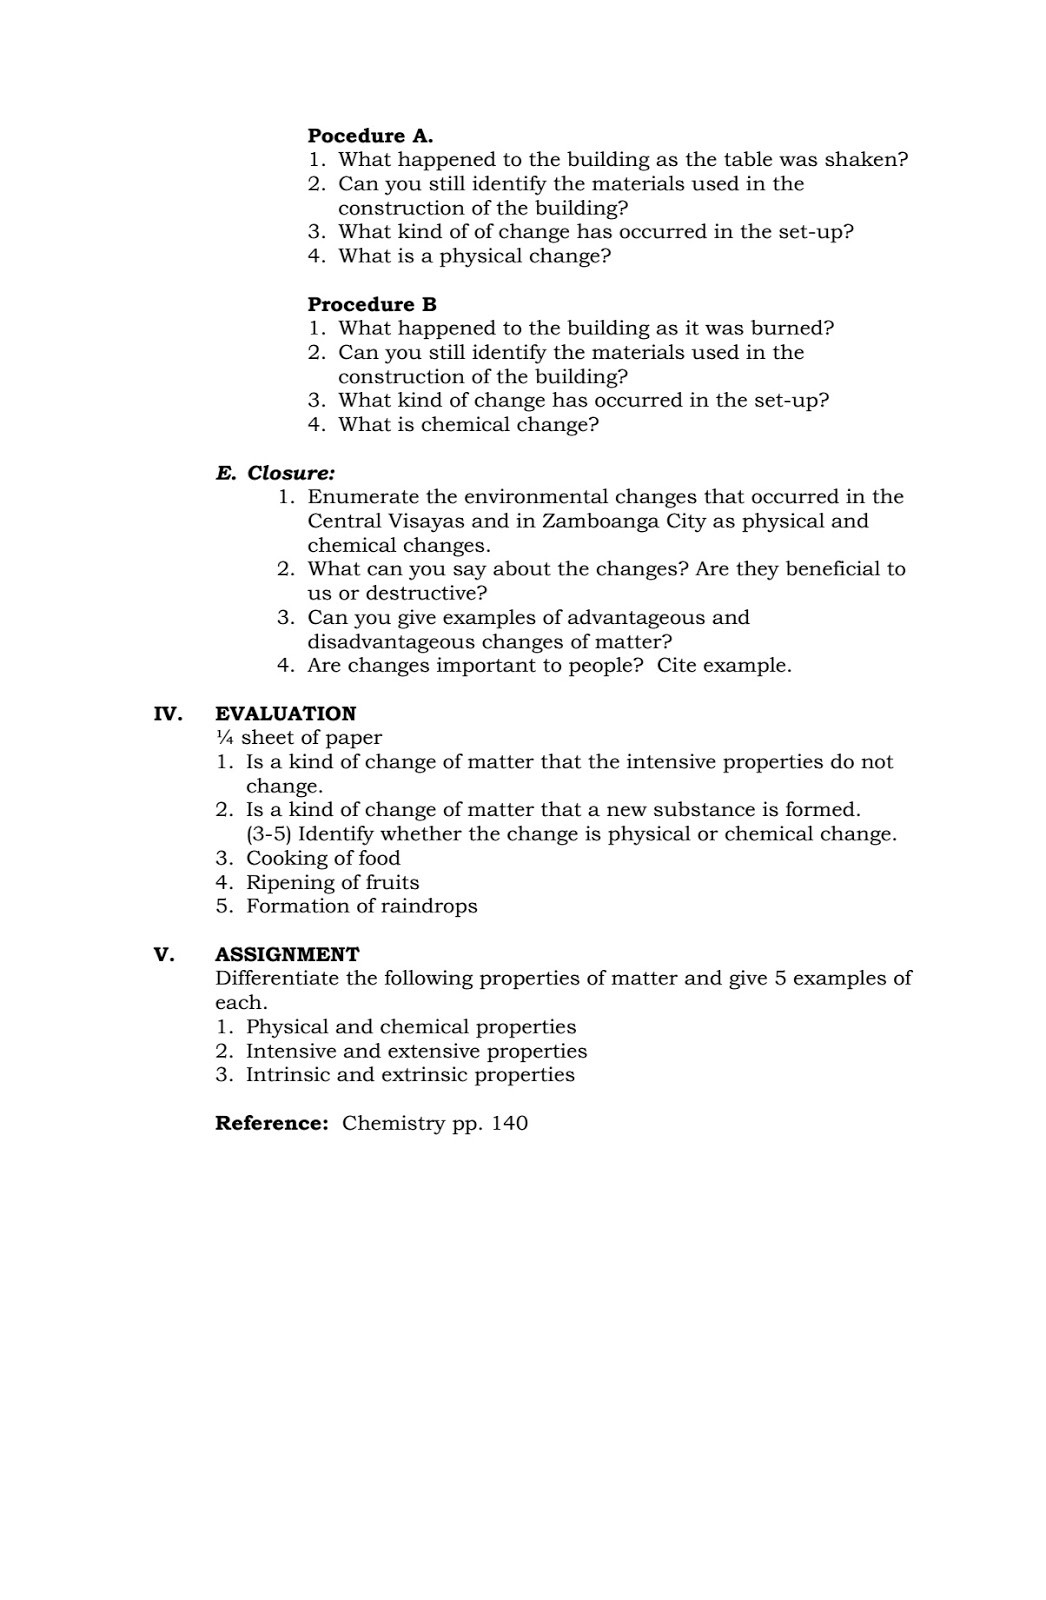 Lesson Plan for Science Science Concepts and Questions K to 12 Sample Lesson